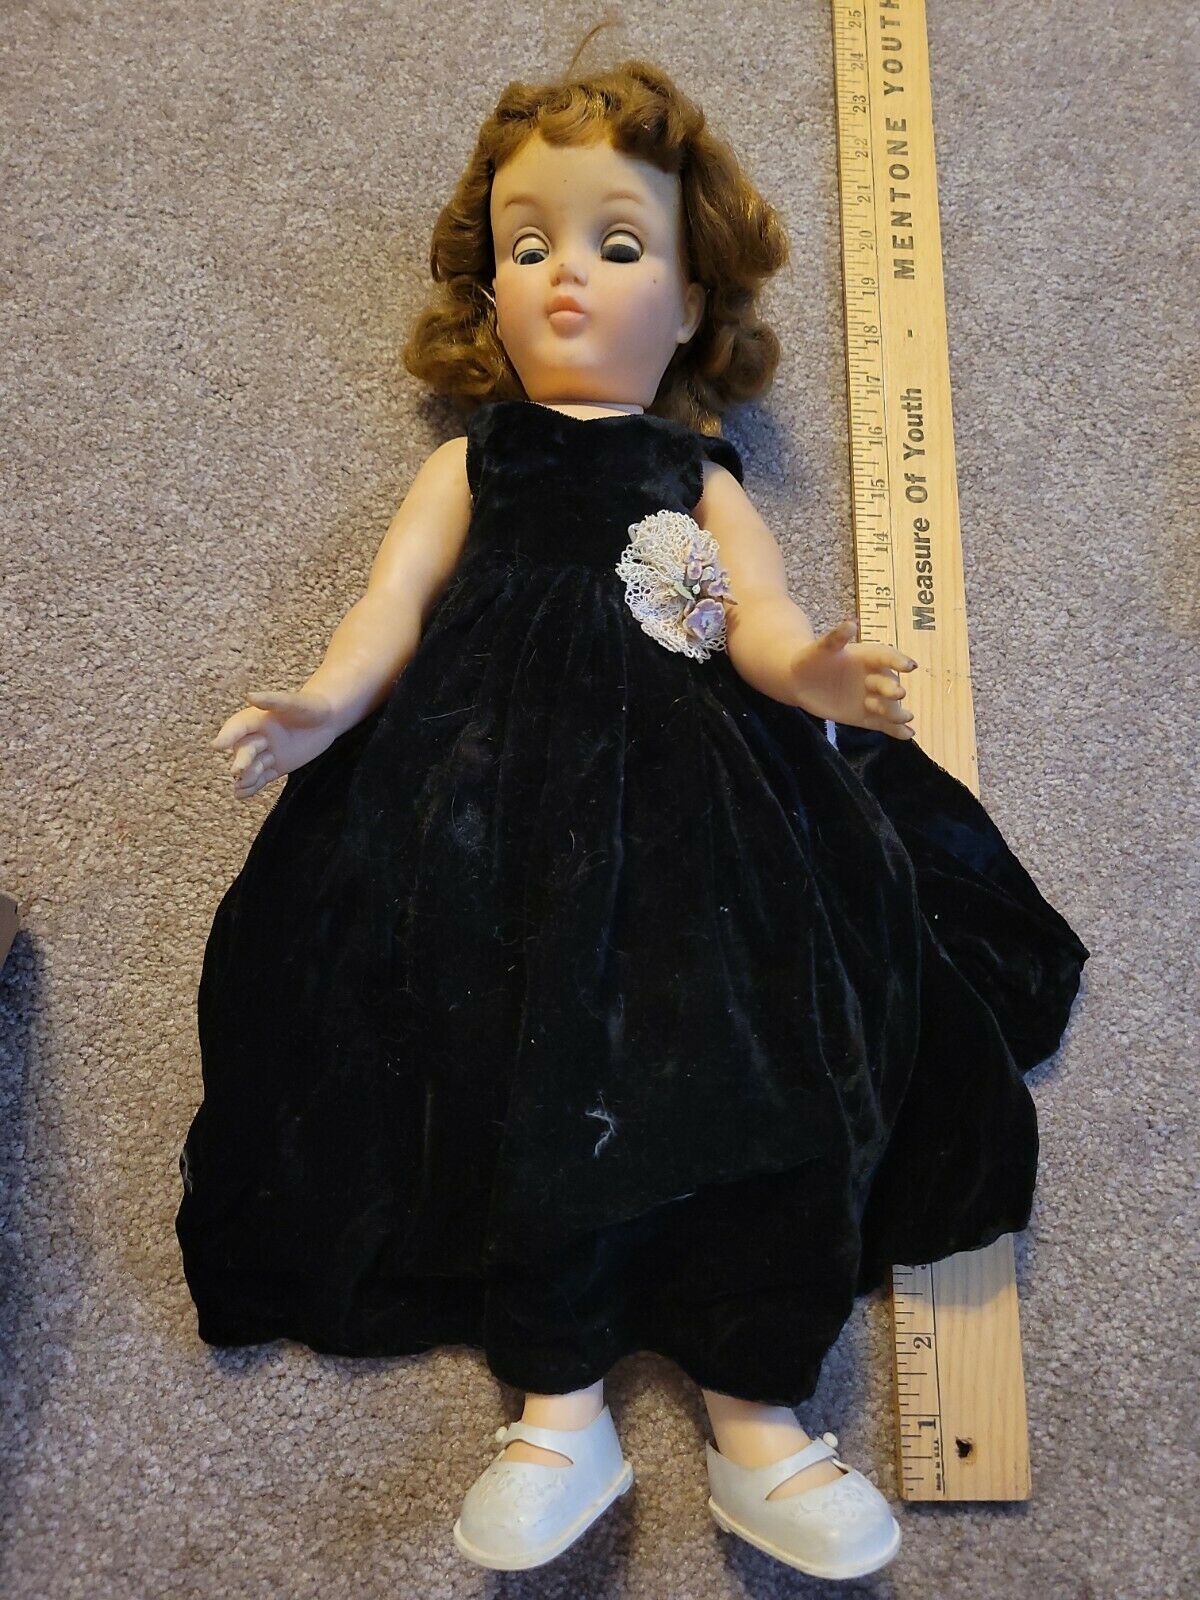 Ideal P 93 Doll 20" W Black Dress & Shoes Moving Eyes Some Damage